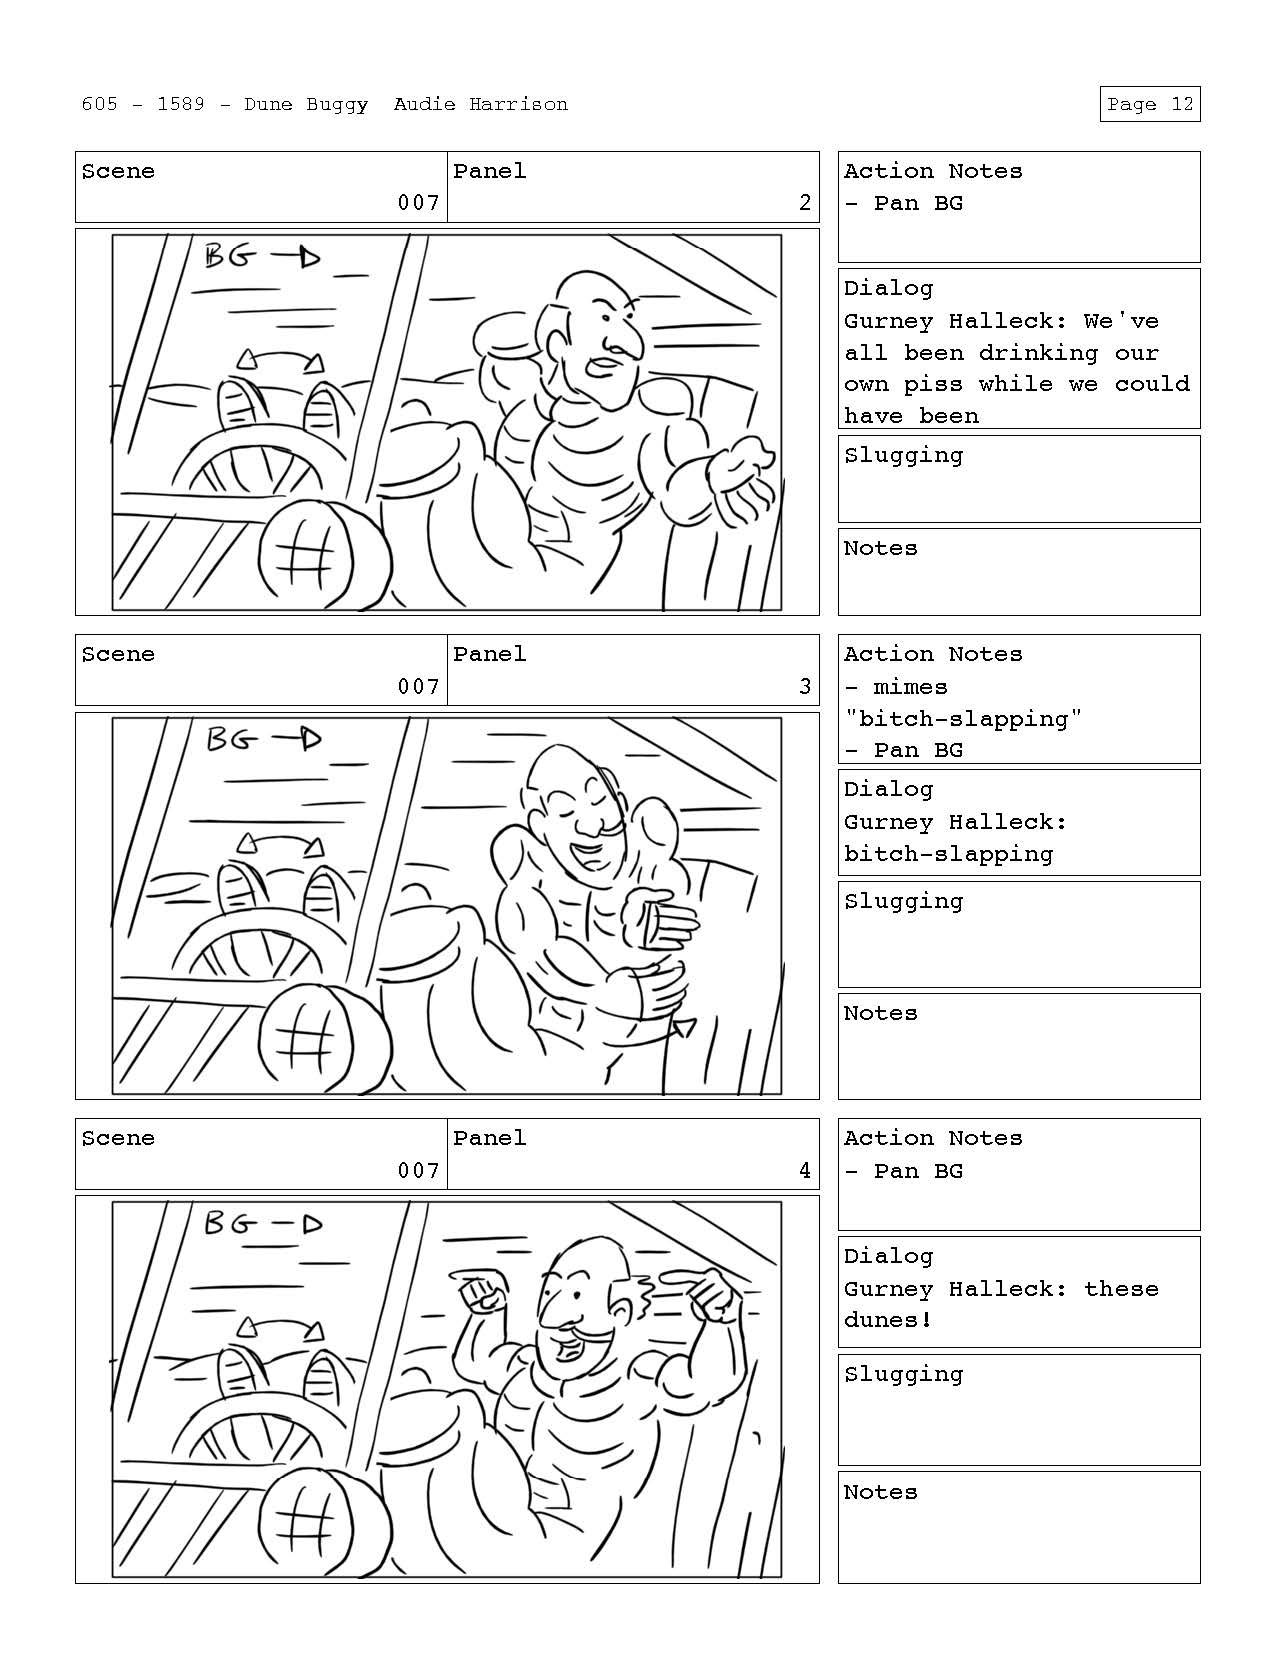 Dune_Buggy_Page_13.jpg